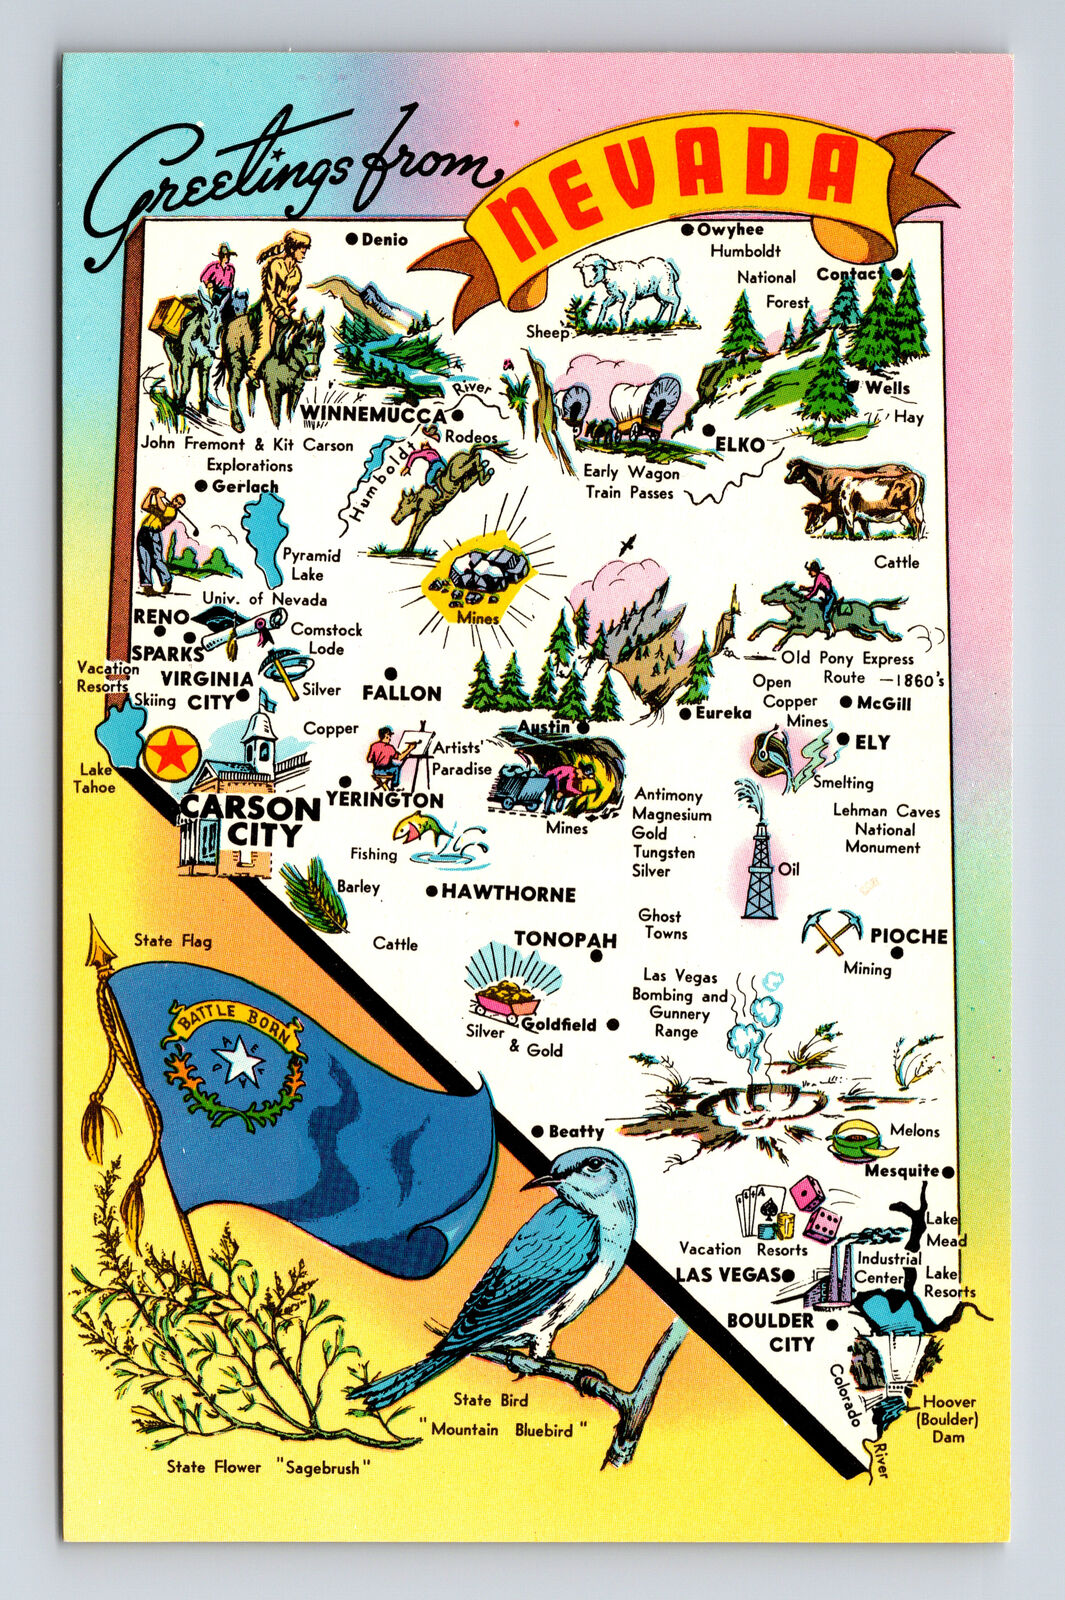 Pictorial Tourist Map State Flag Bird Flower Greetings from Nevada NV Postcard